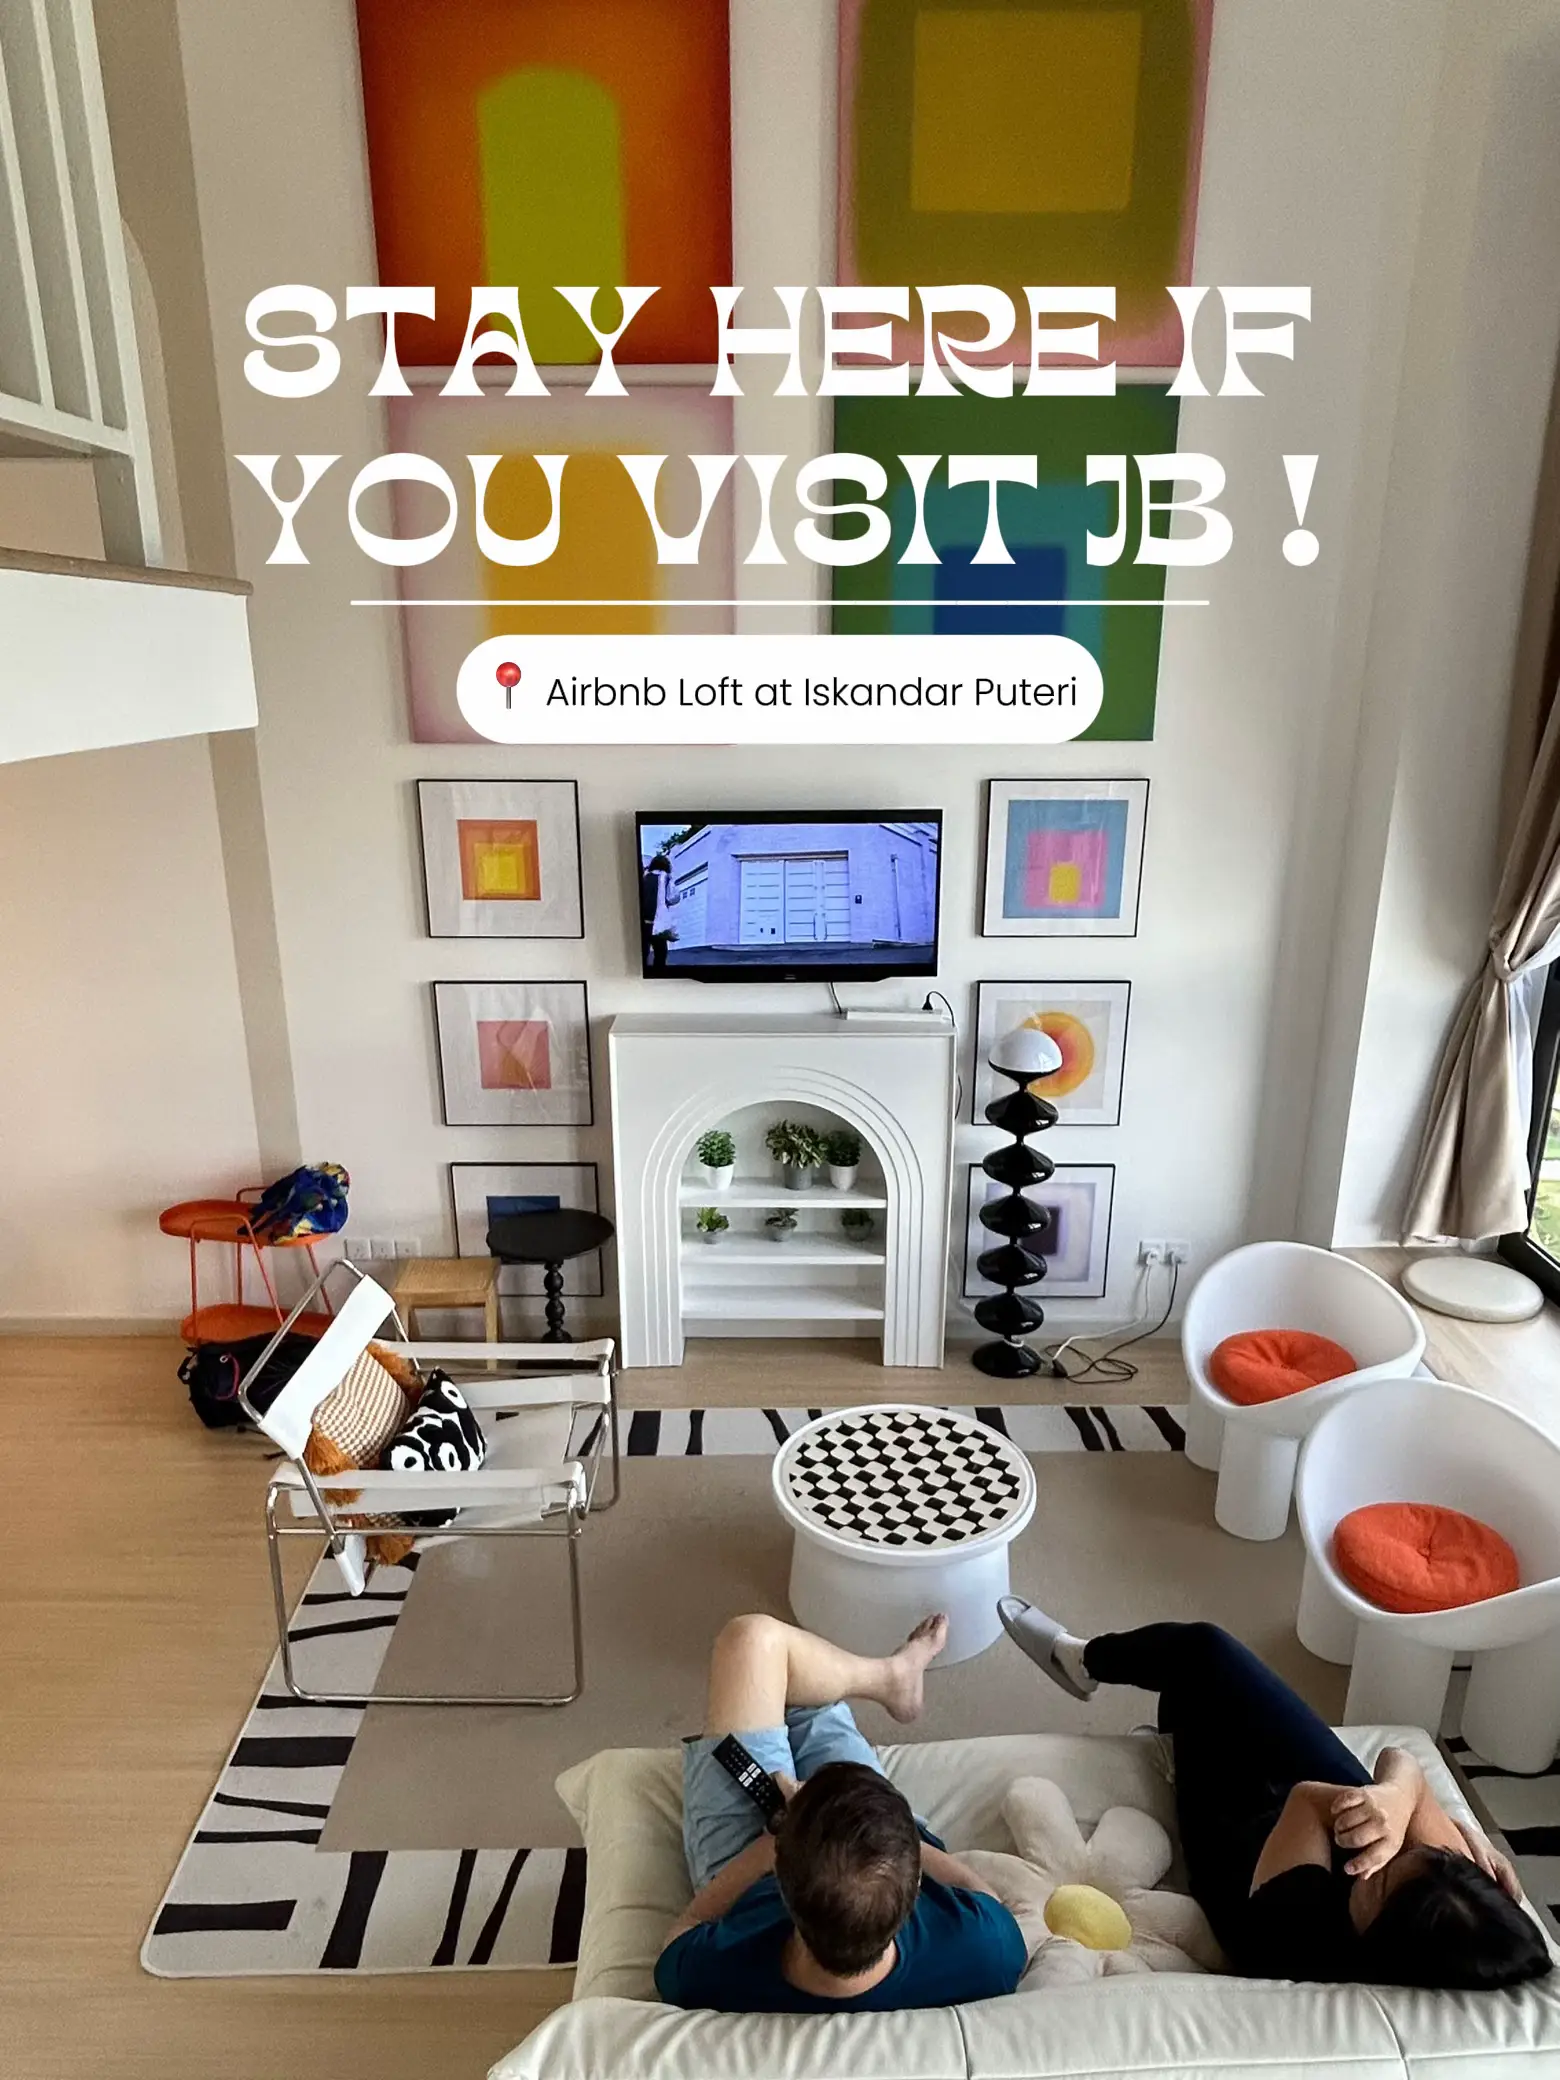 [JBFinds] - STAY HERE IF YOU VISIT JB !'s images